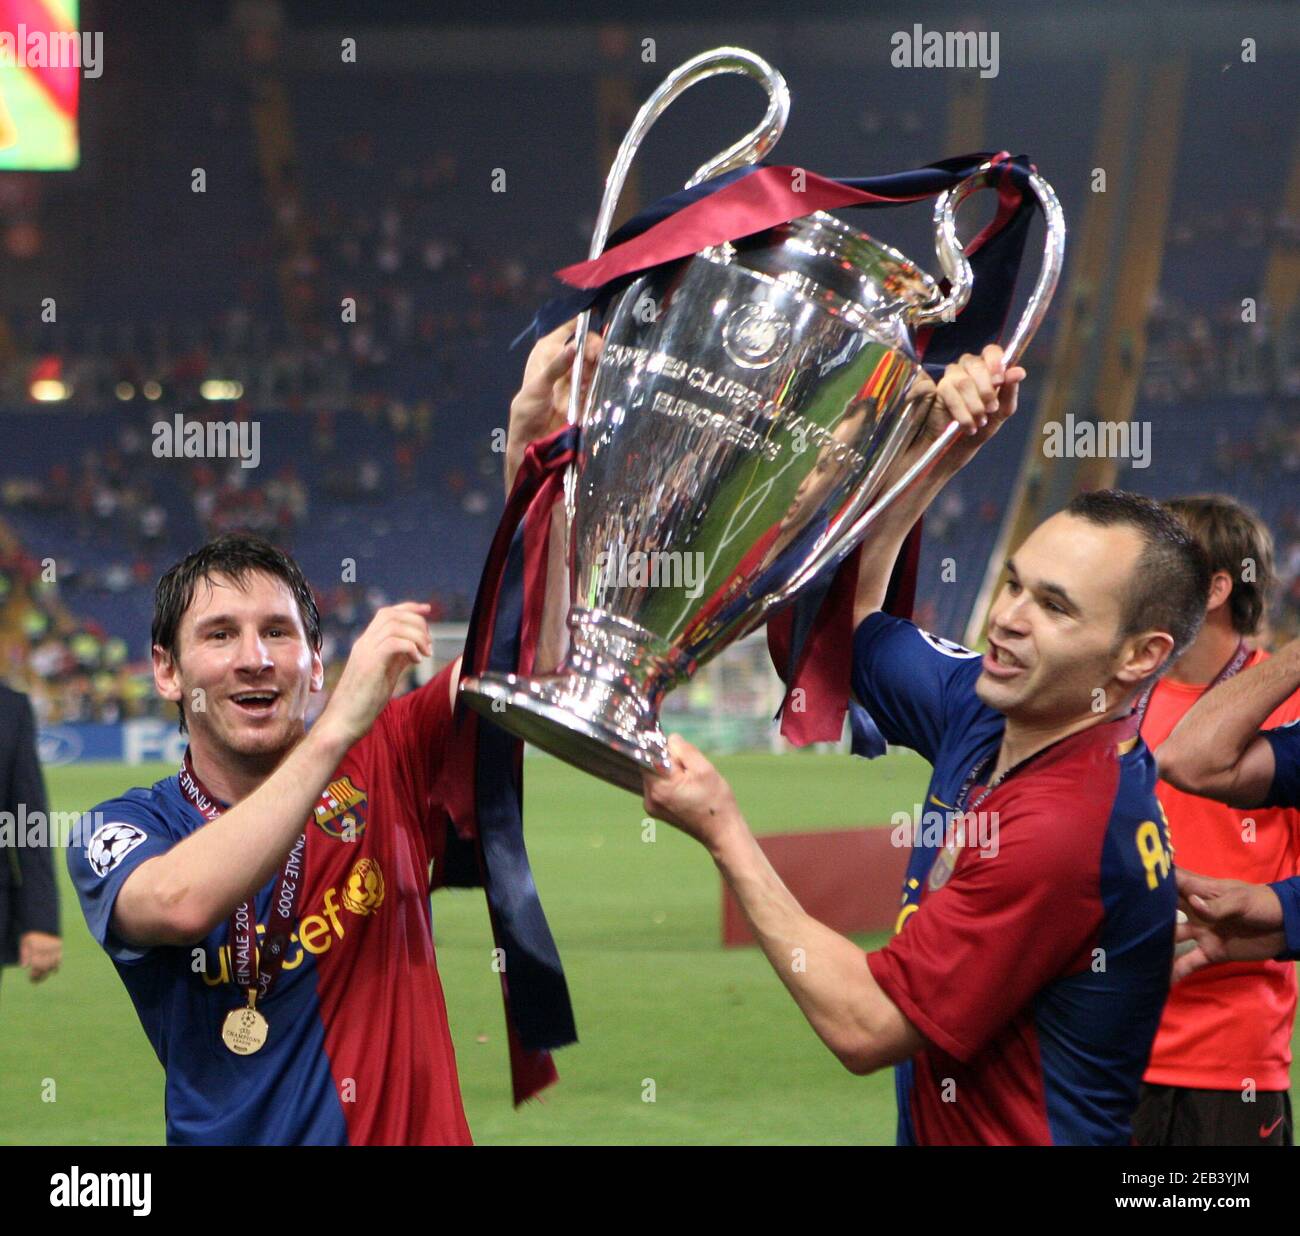 Football - Manchester United v FC Barcelona 2009 Champions League Final -  Olympic Stadium, Rome, Italy - 27/5/09 Barcelona's Lionel Messi (L) and  Andres Iniesta celebrate victory with the trophy Mandatory Credit: